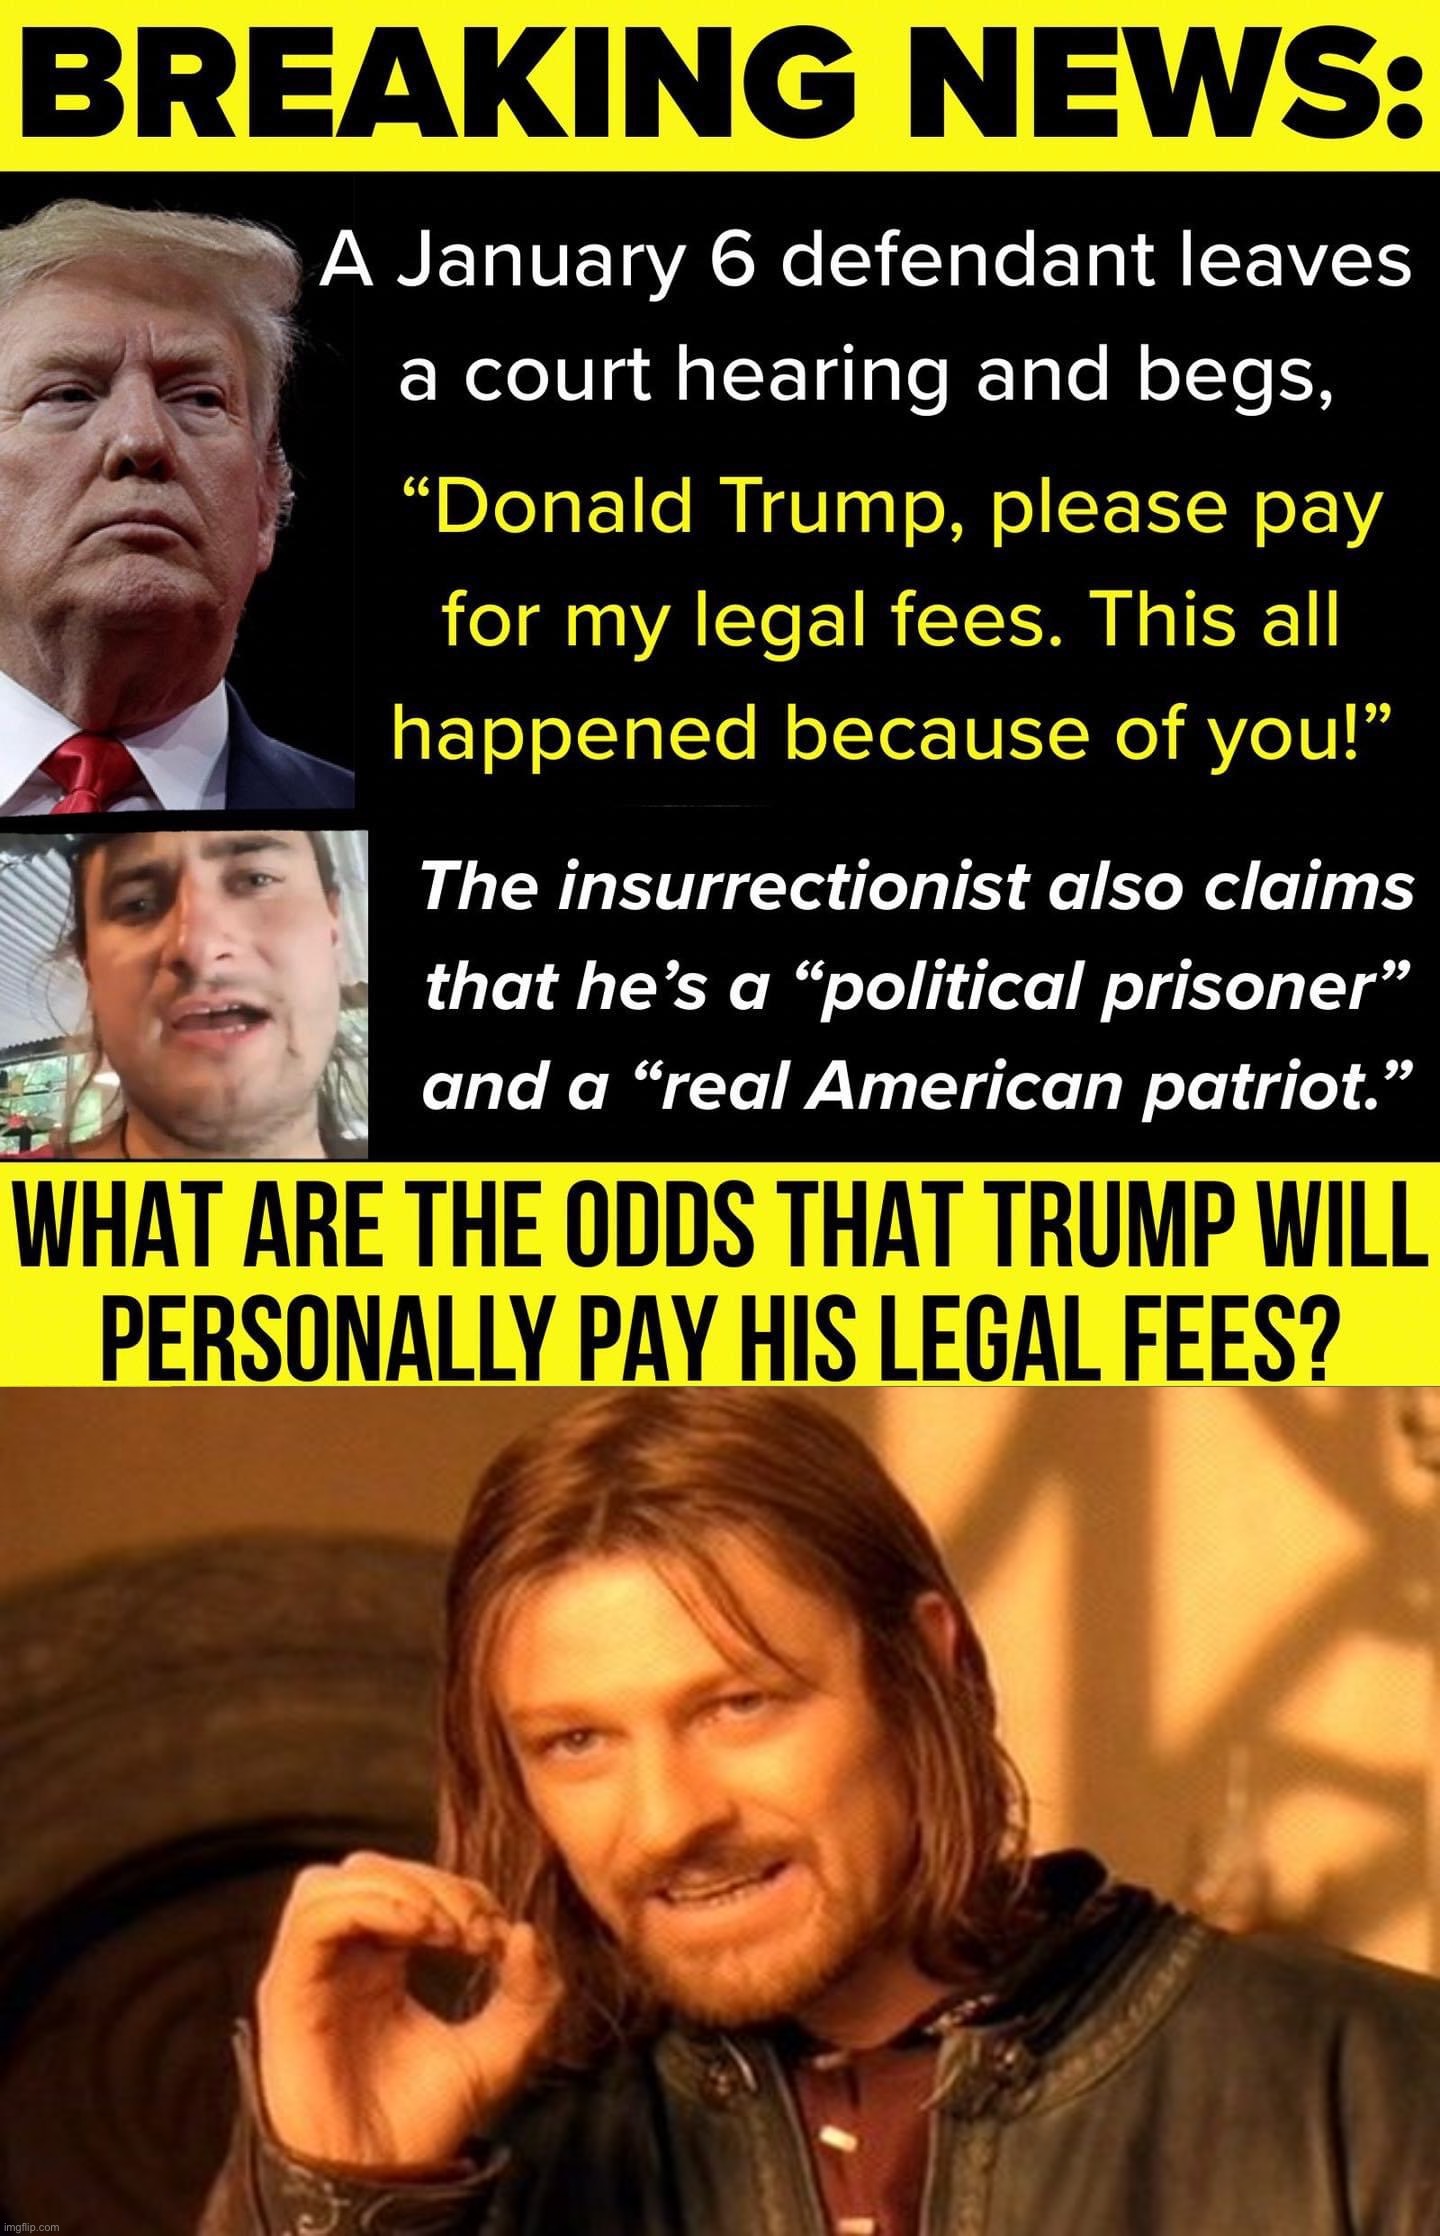 Boromir’s got this one | image tagged in memes,one does not simply,boromir,trump,trump is an asshole,trump is a moron | made w/ Imgflip meme maker